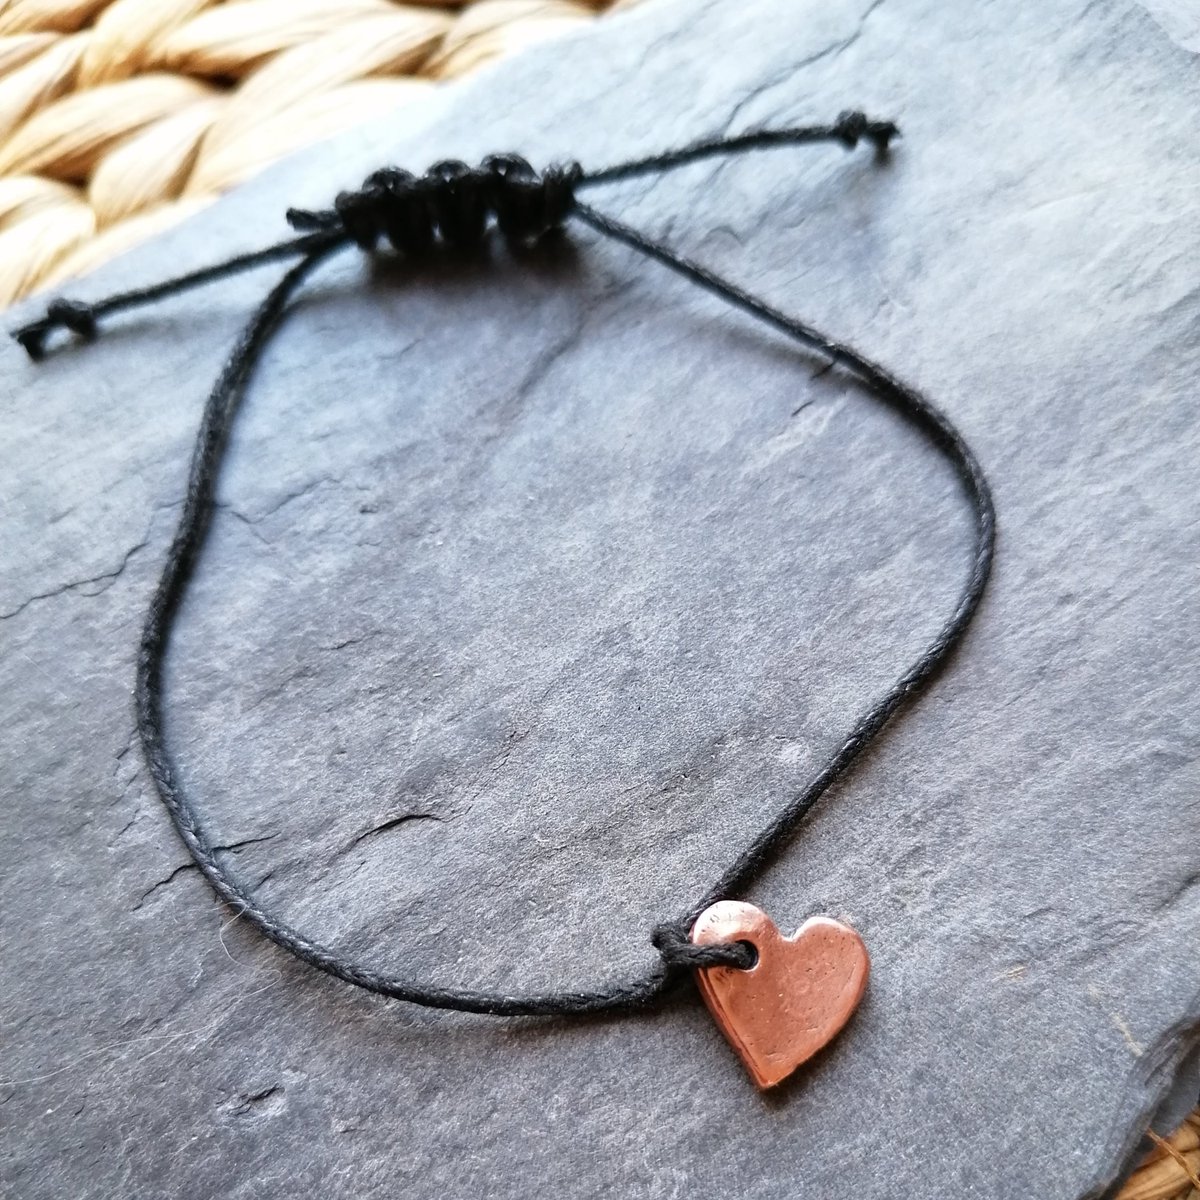 A NEW PRODUCT! It's just £5 this week as an introductory price.  It's a cute little copper heart on an adjustable cord bracelet.
etsy.me/3tDUe9s 
#friendshipbracelet #copperfriendshipbracelet #copperjewellery #lockdowngift #missyougift #stringbracelet #adjustablebracelet